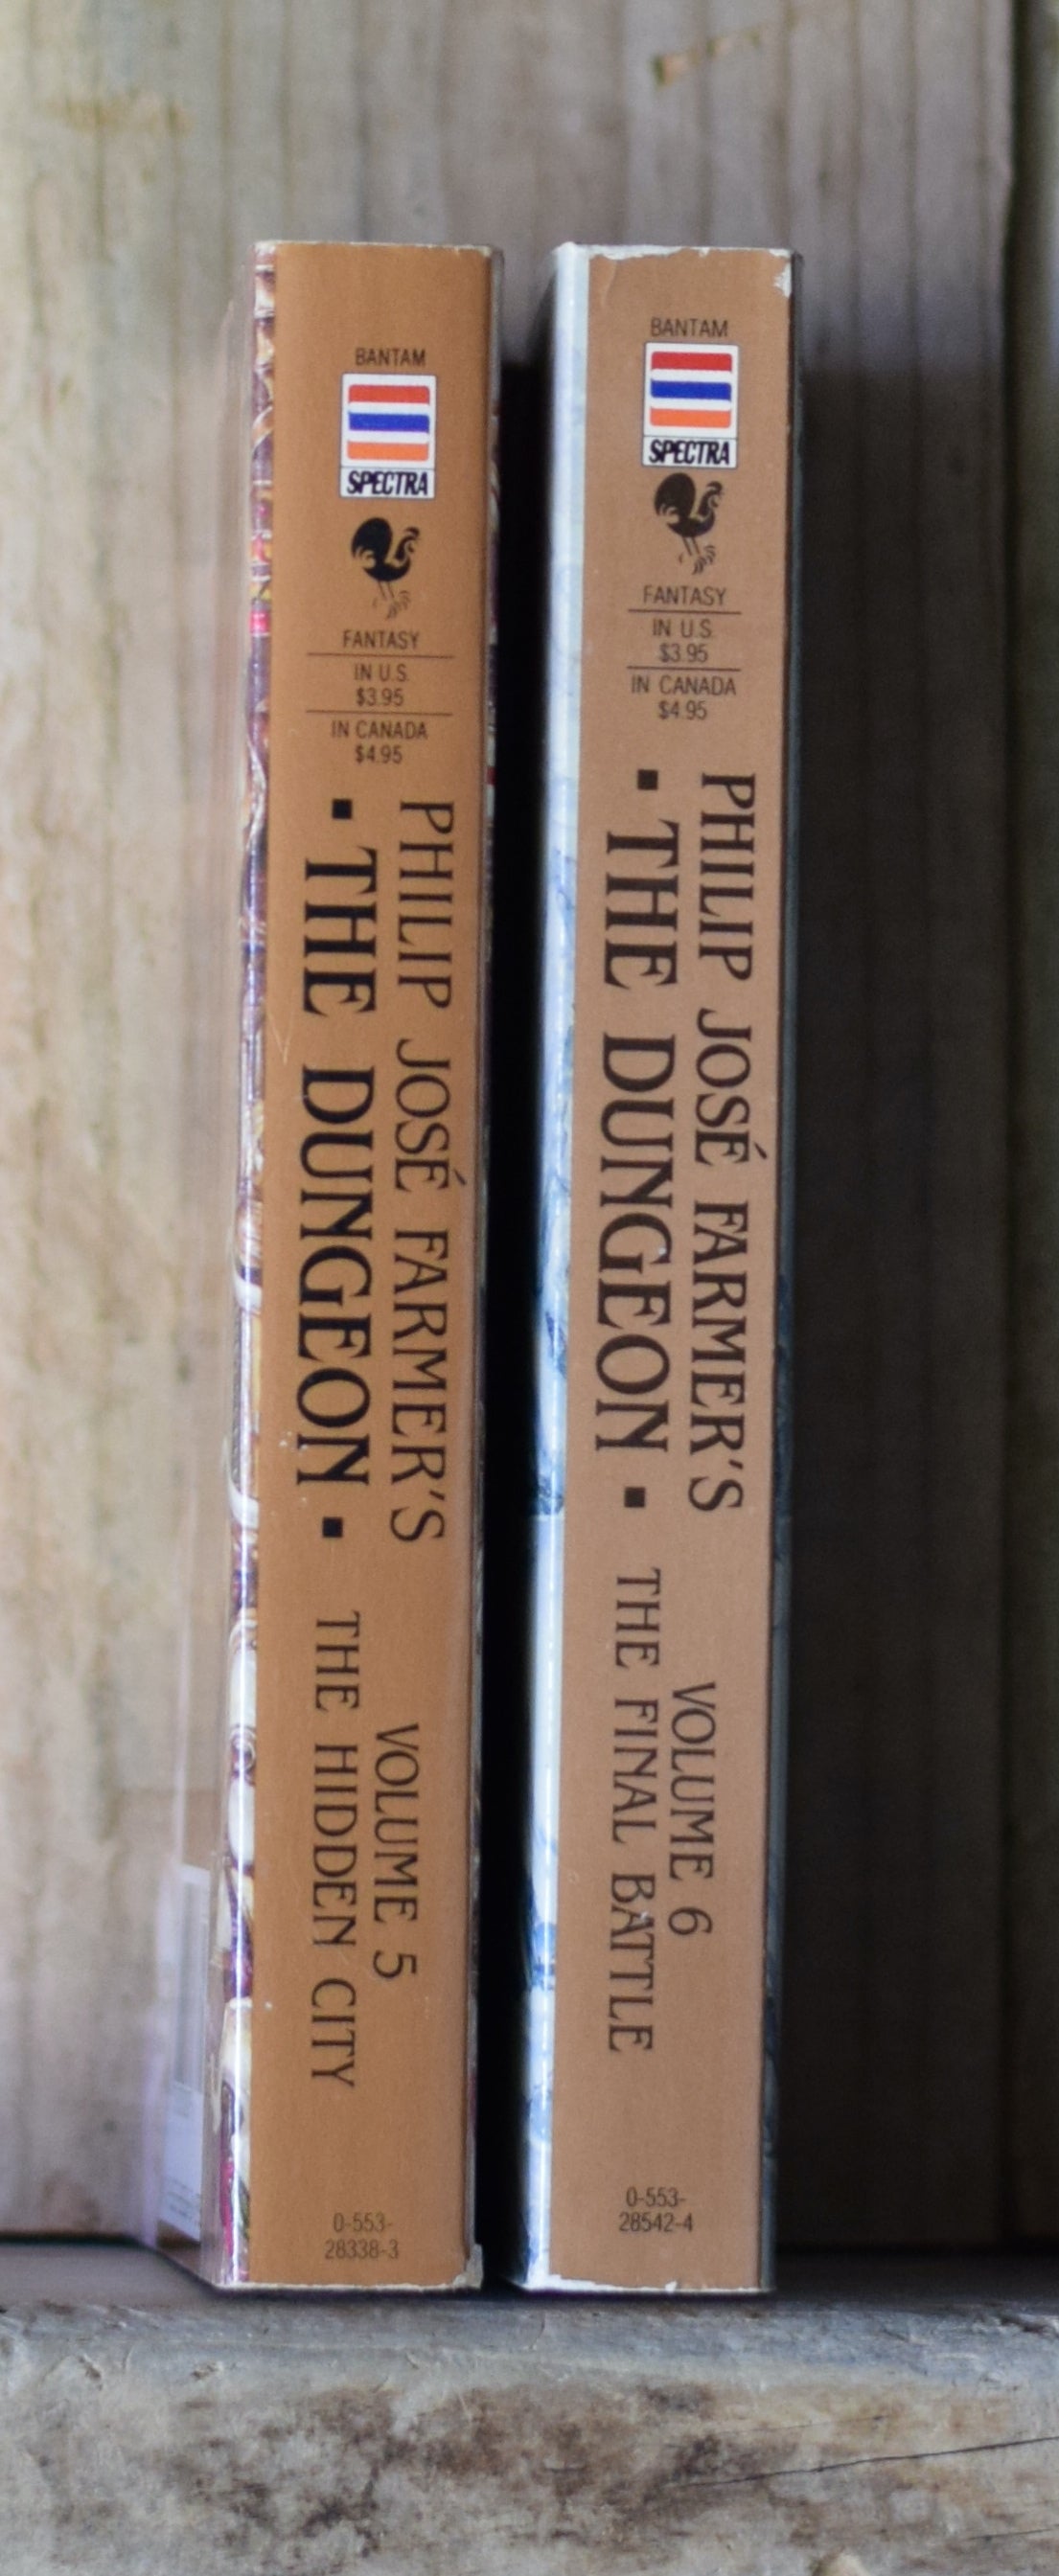 Vintage Fantasy Paperbacks: Richard Lupoff & Charles De Lint- The Dungeon, Vol 5 & 6 SECOND PRINTINGS